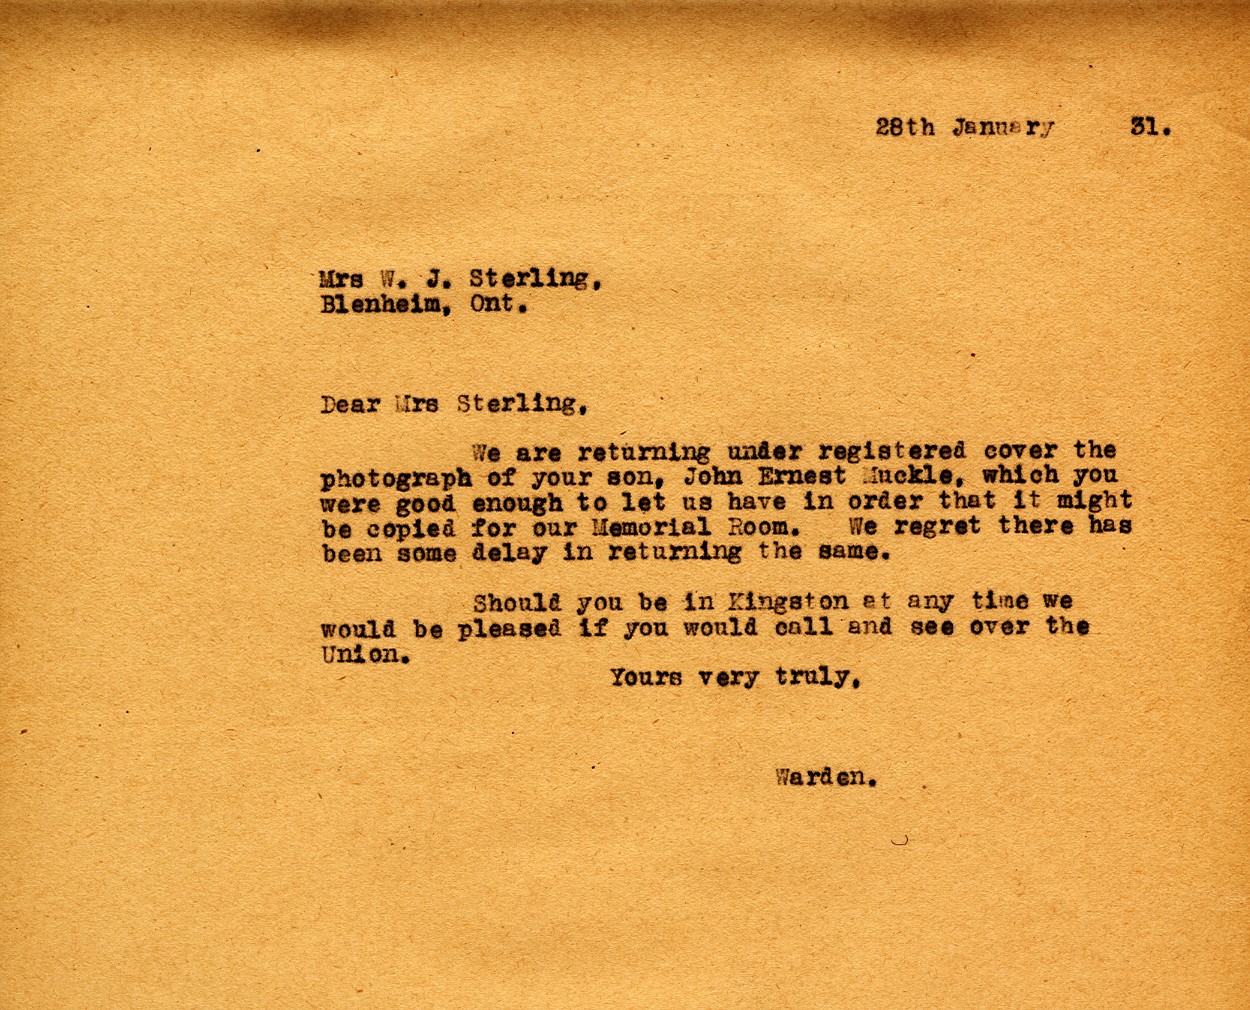 Letter from the Warden to Mrs. W.J. Sterling, 28th January 1931